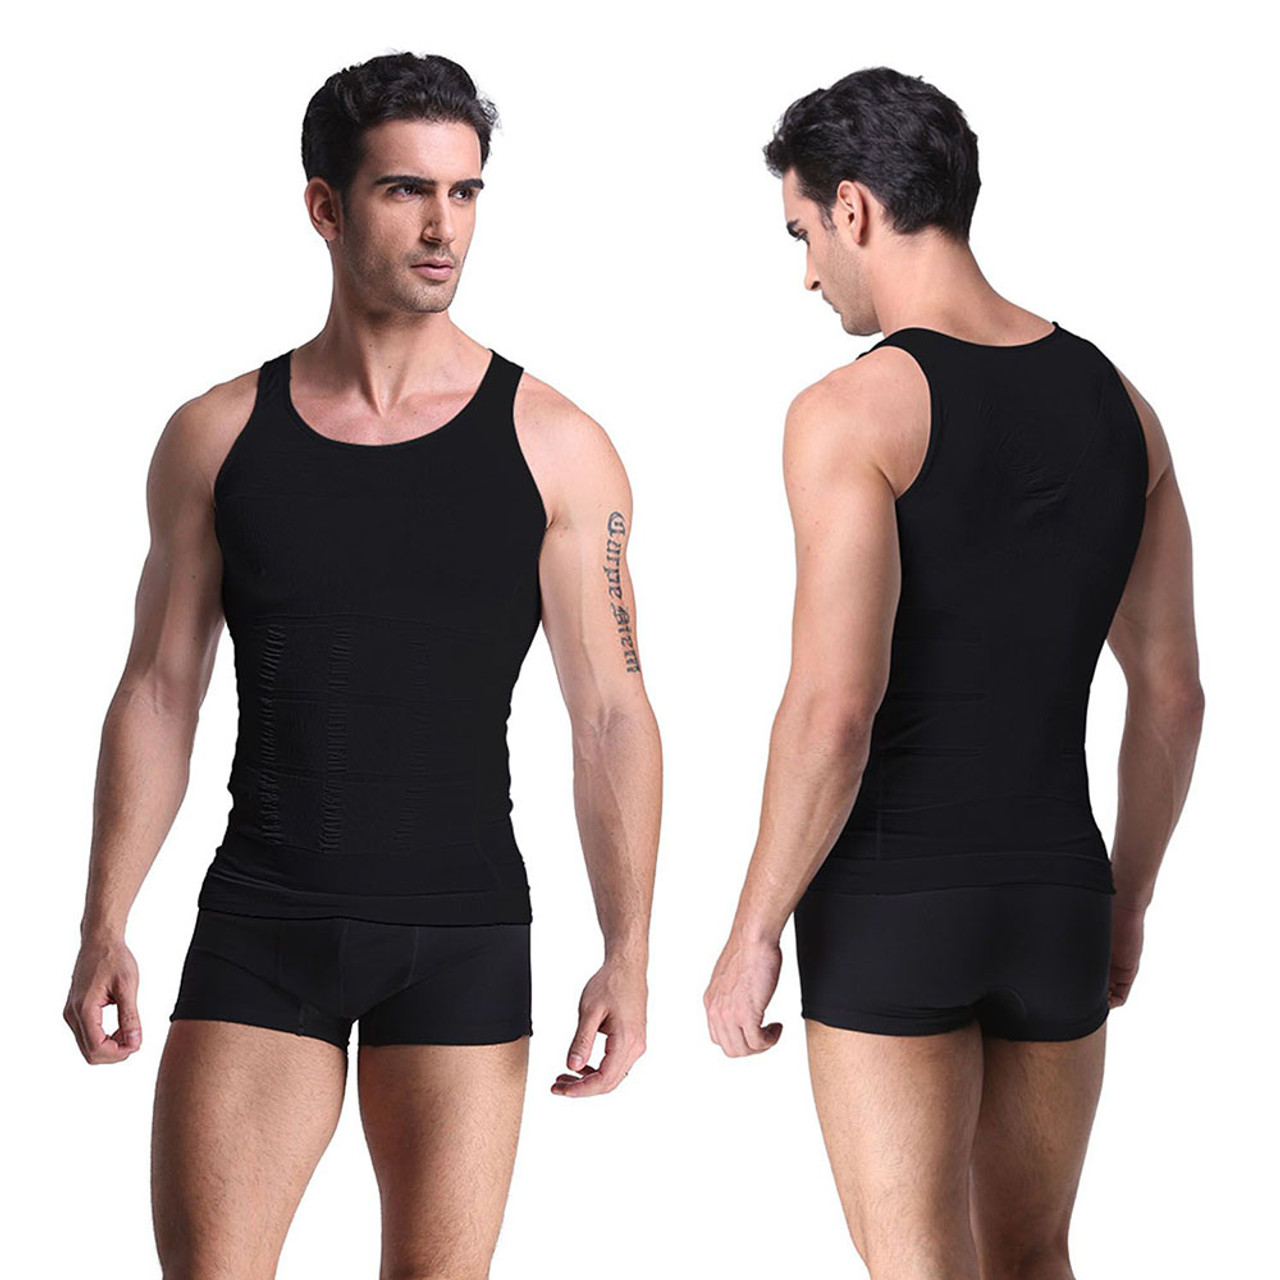 Men’s Core Support and Insta-Trim Compression Undershirt $14.99 (70% OFF)